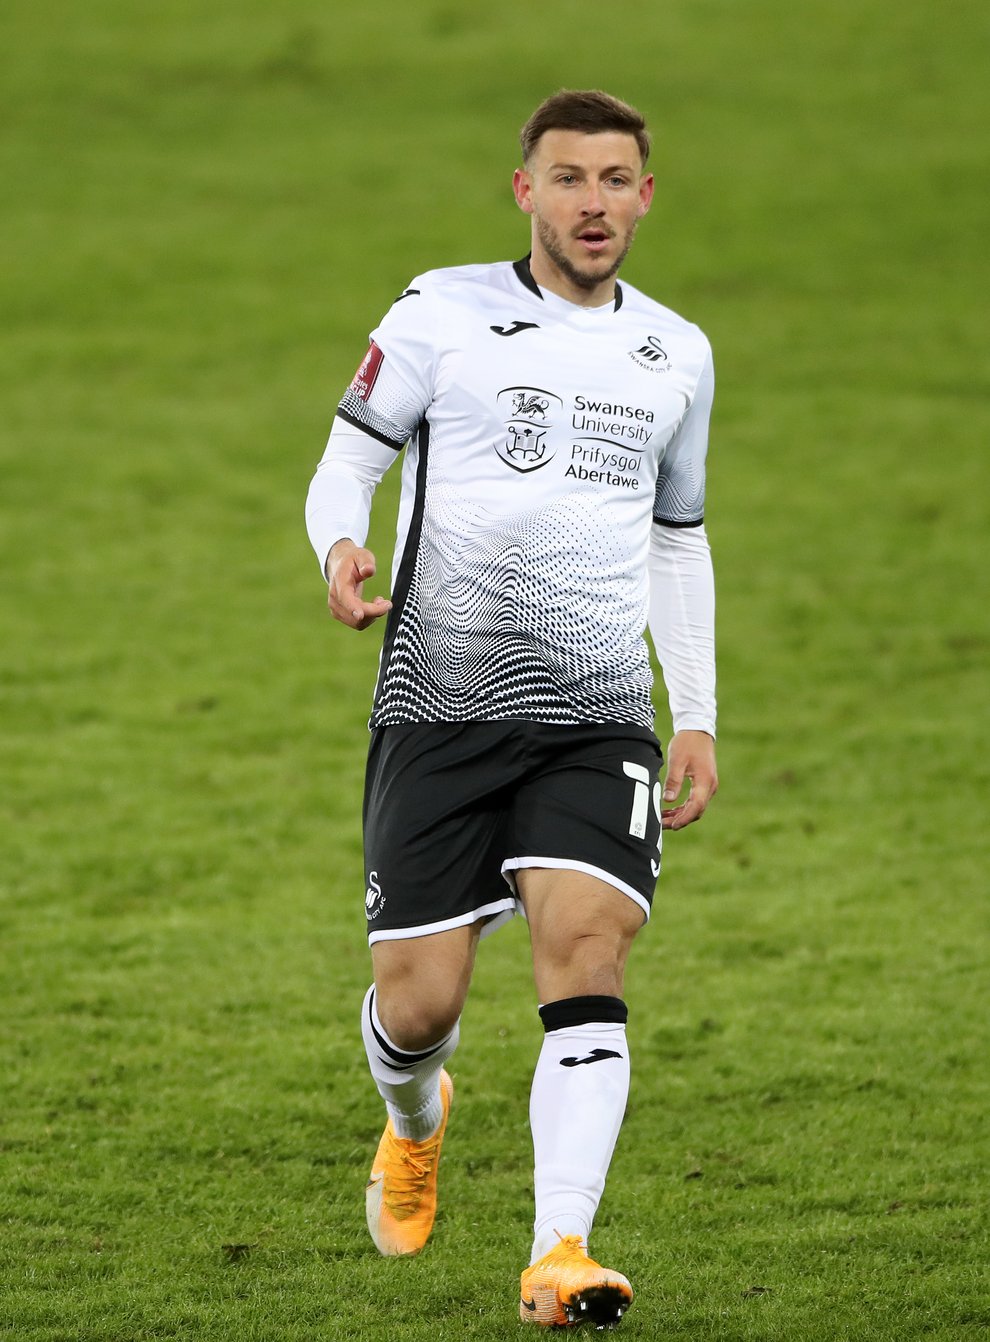 Paul Arriola is on loan at Swansea from DC United